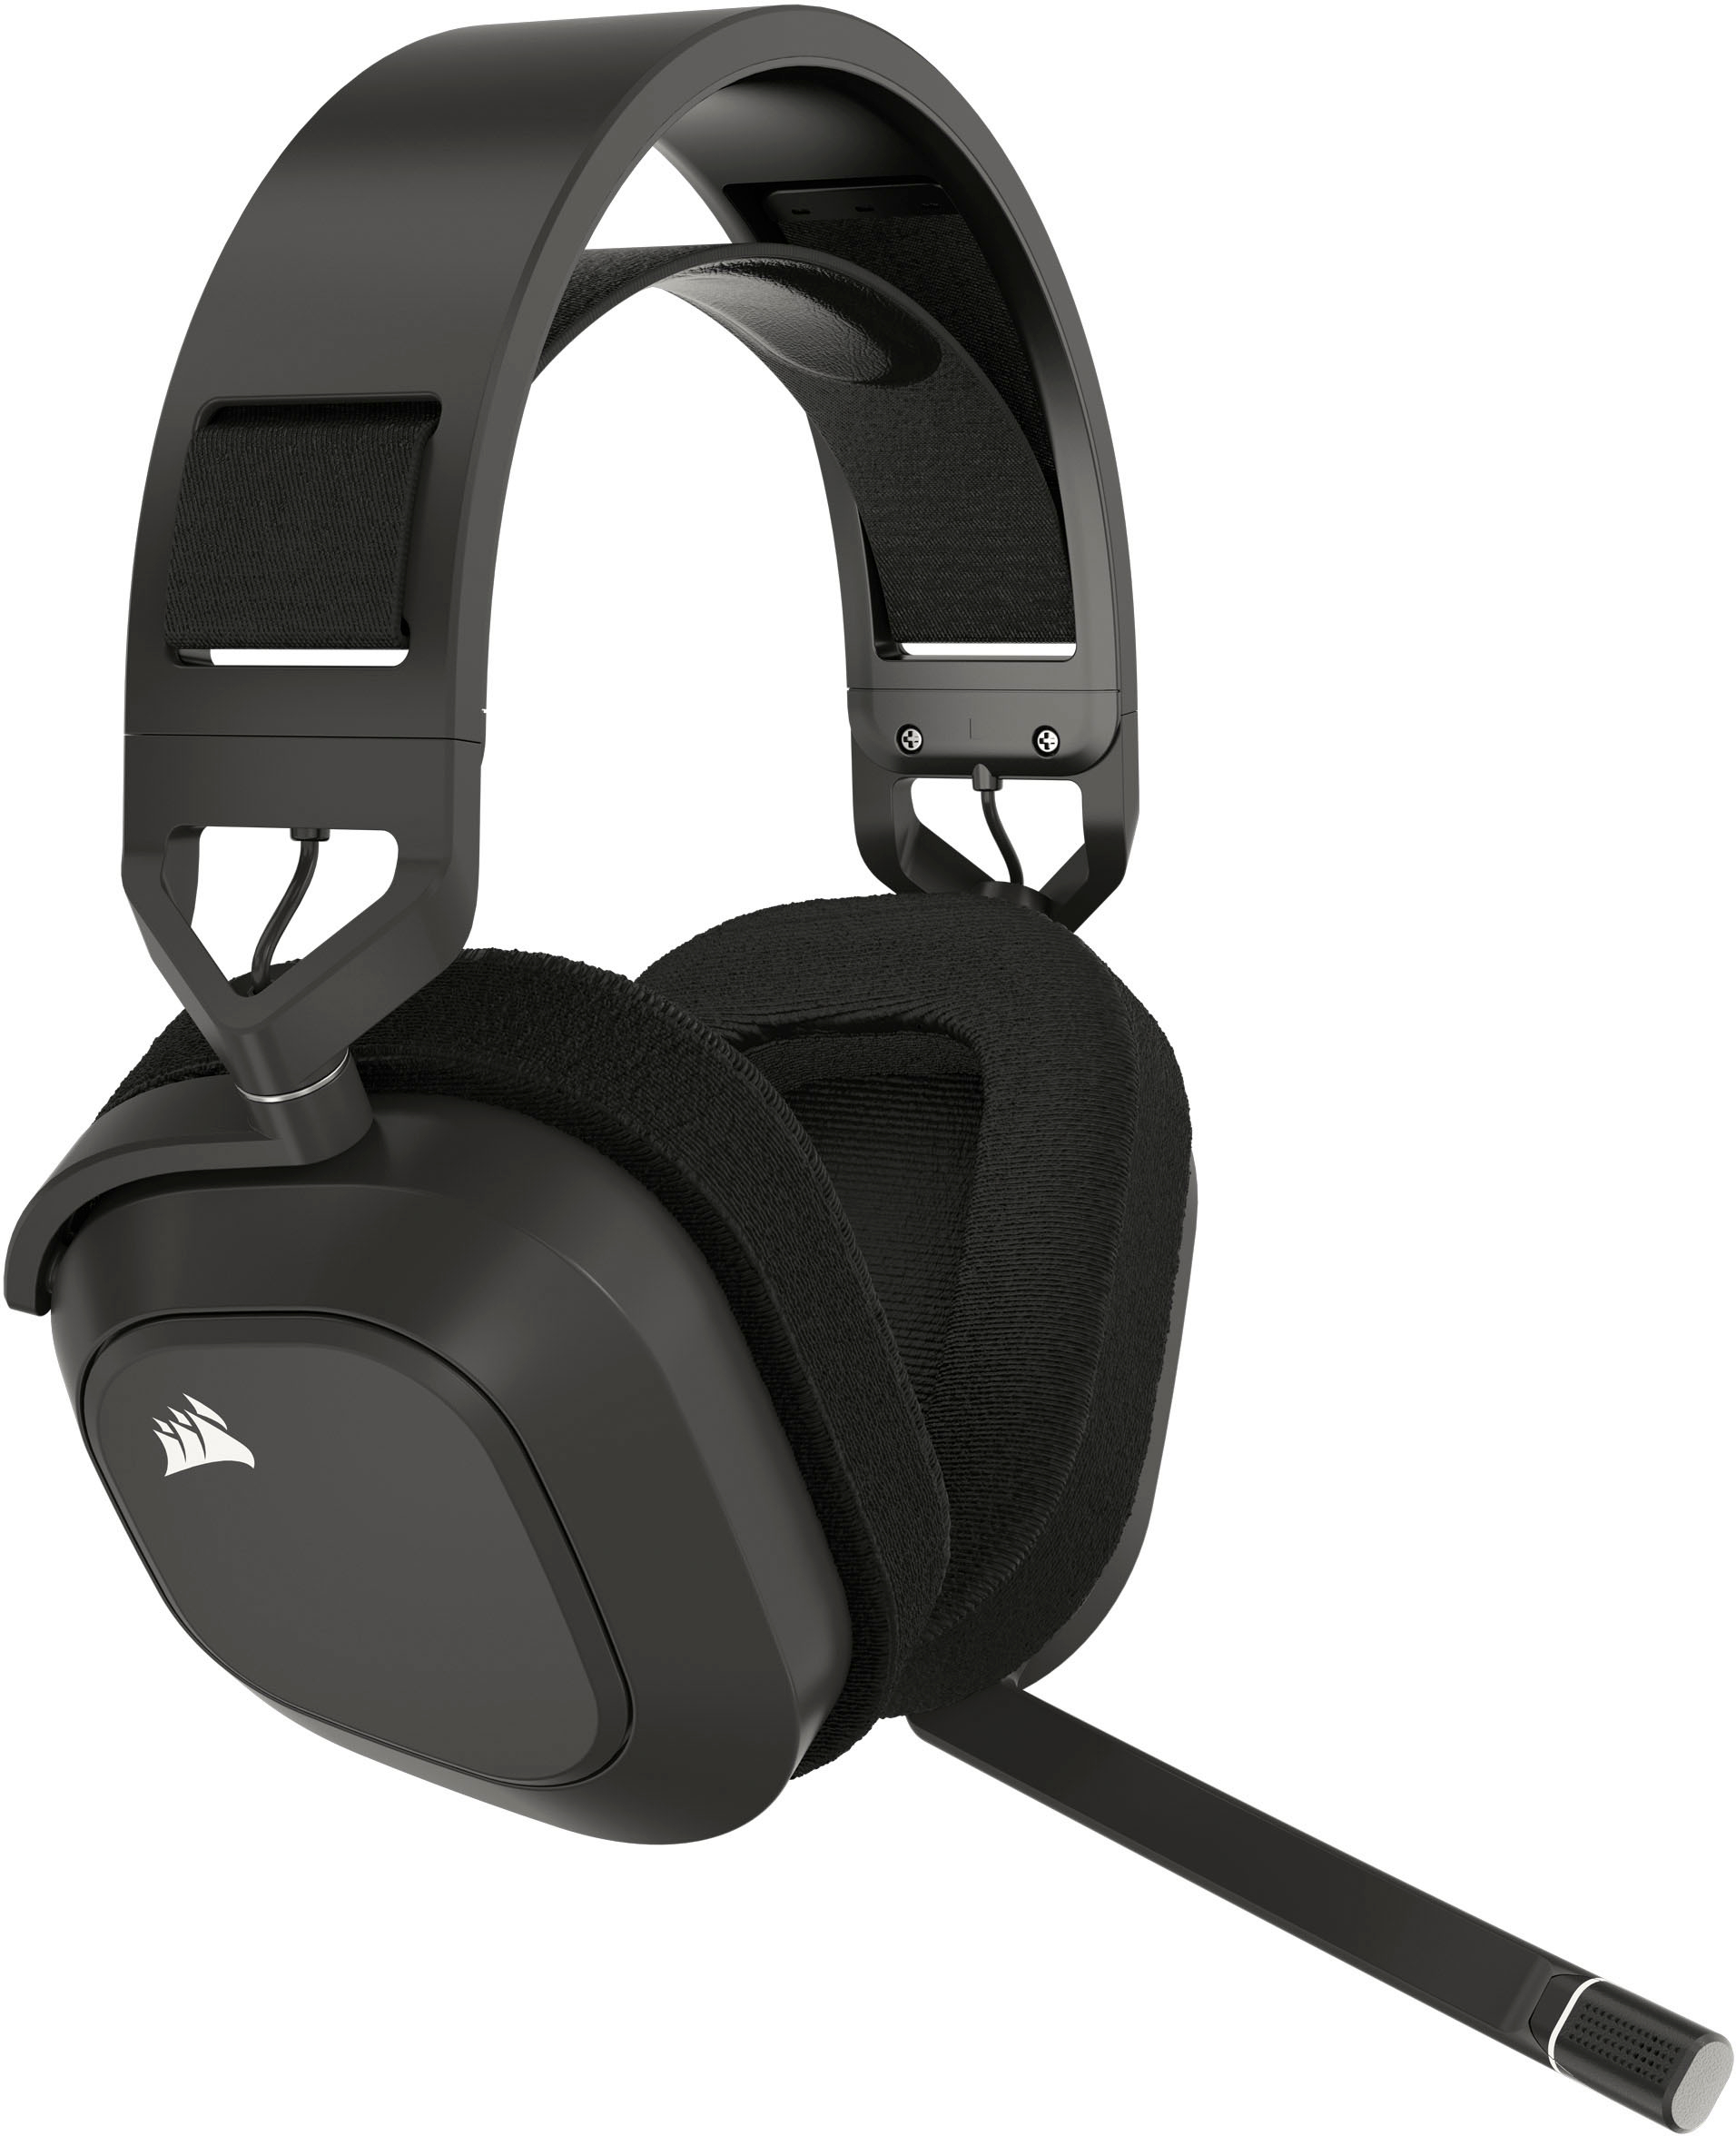 CORSAIR HS80 MAX Wireless Gaming PS4 CA-9011295-NA PS5, Buy Steel Headset - Gray for PC, Best